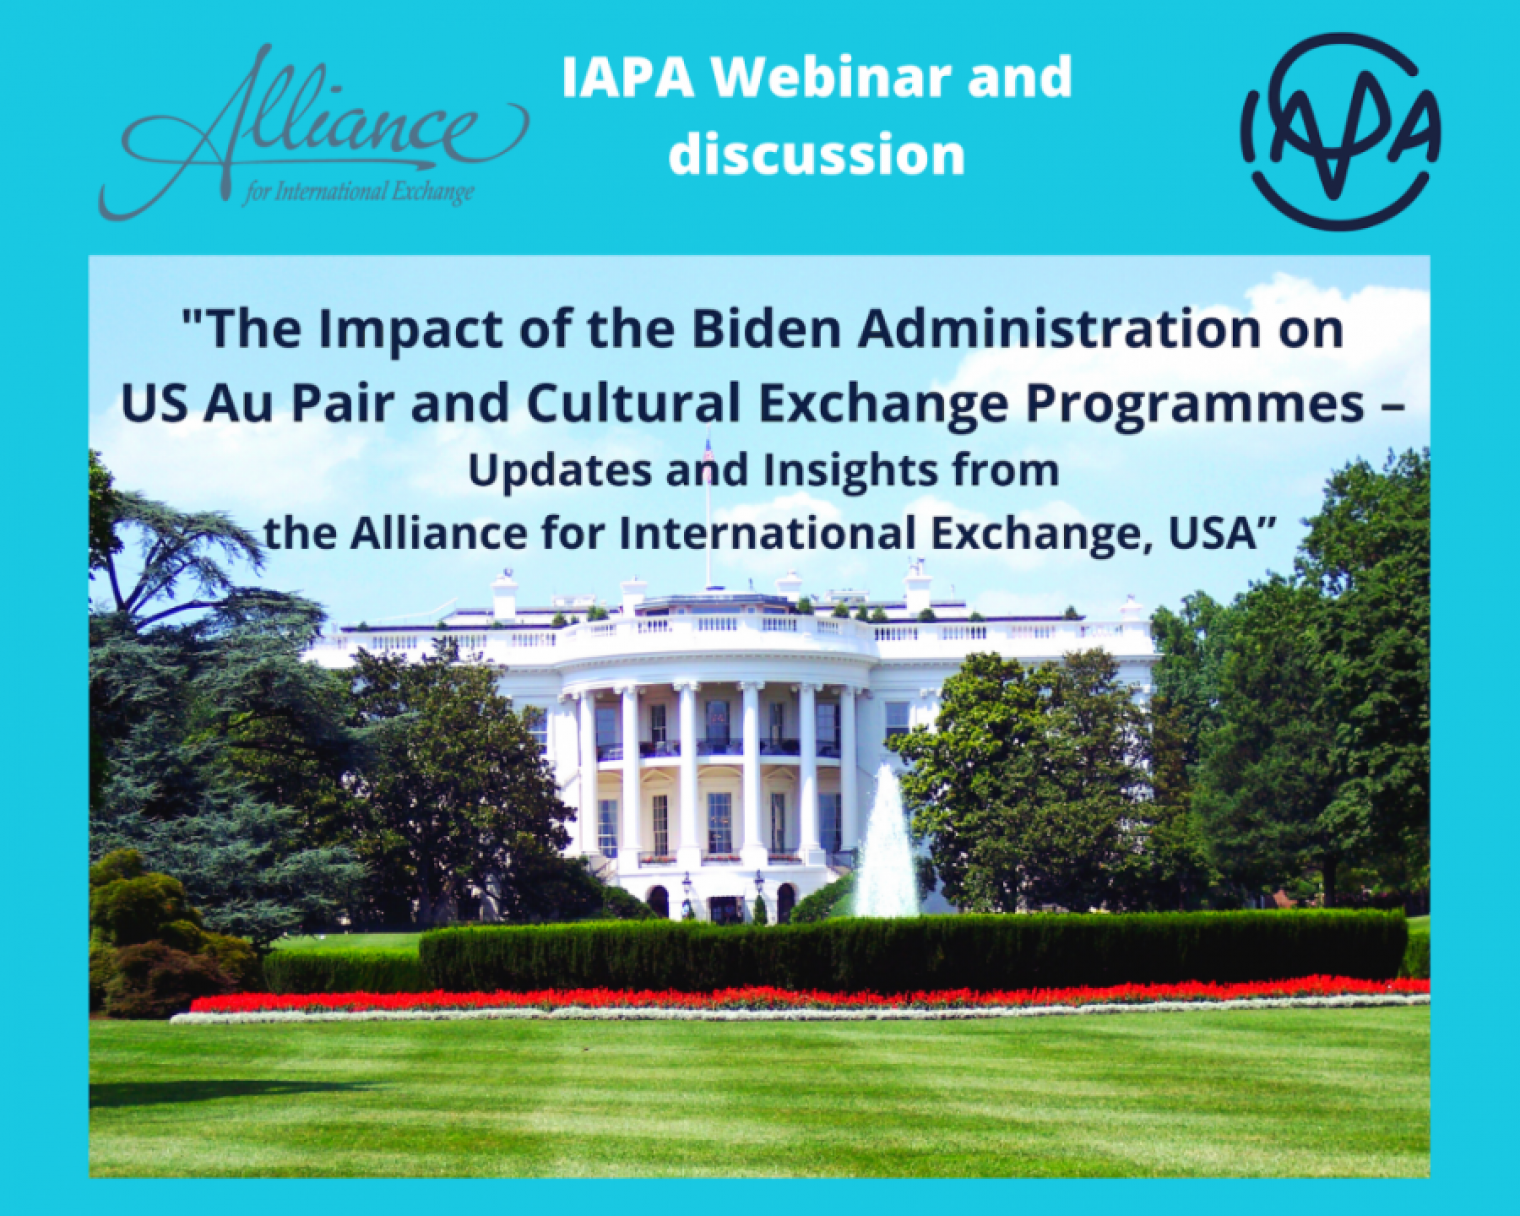 The Impact of the Biden Administration on Cultural Exchange